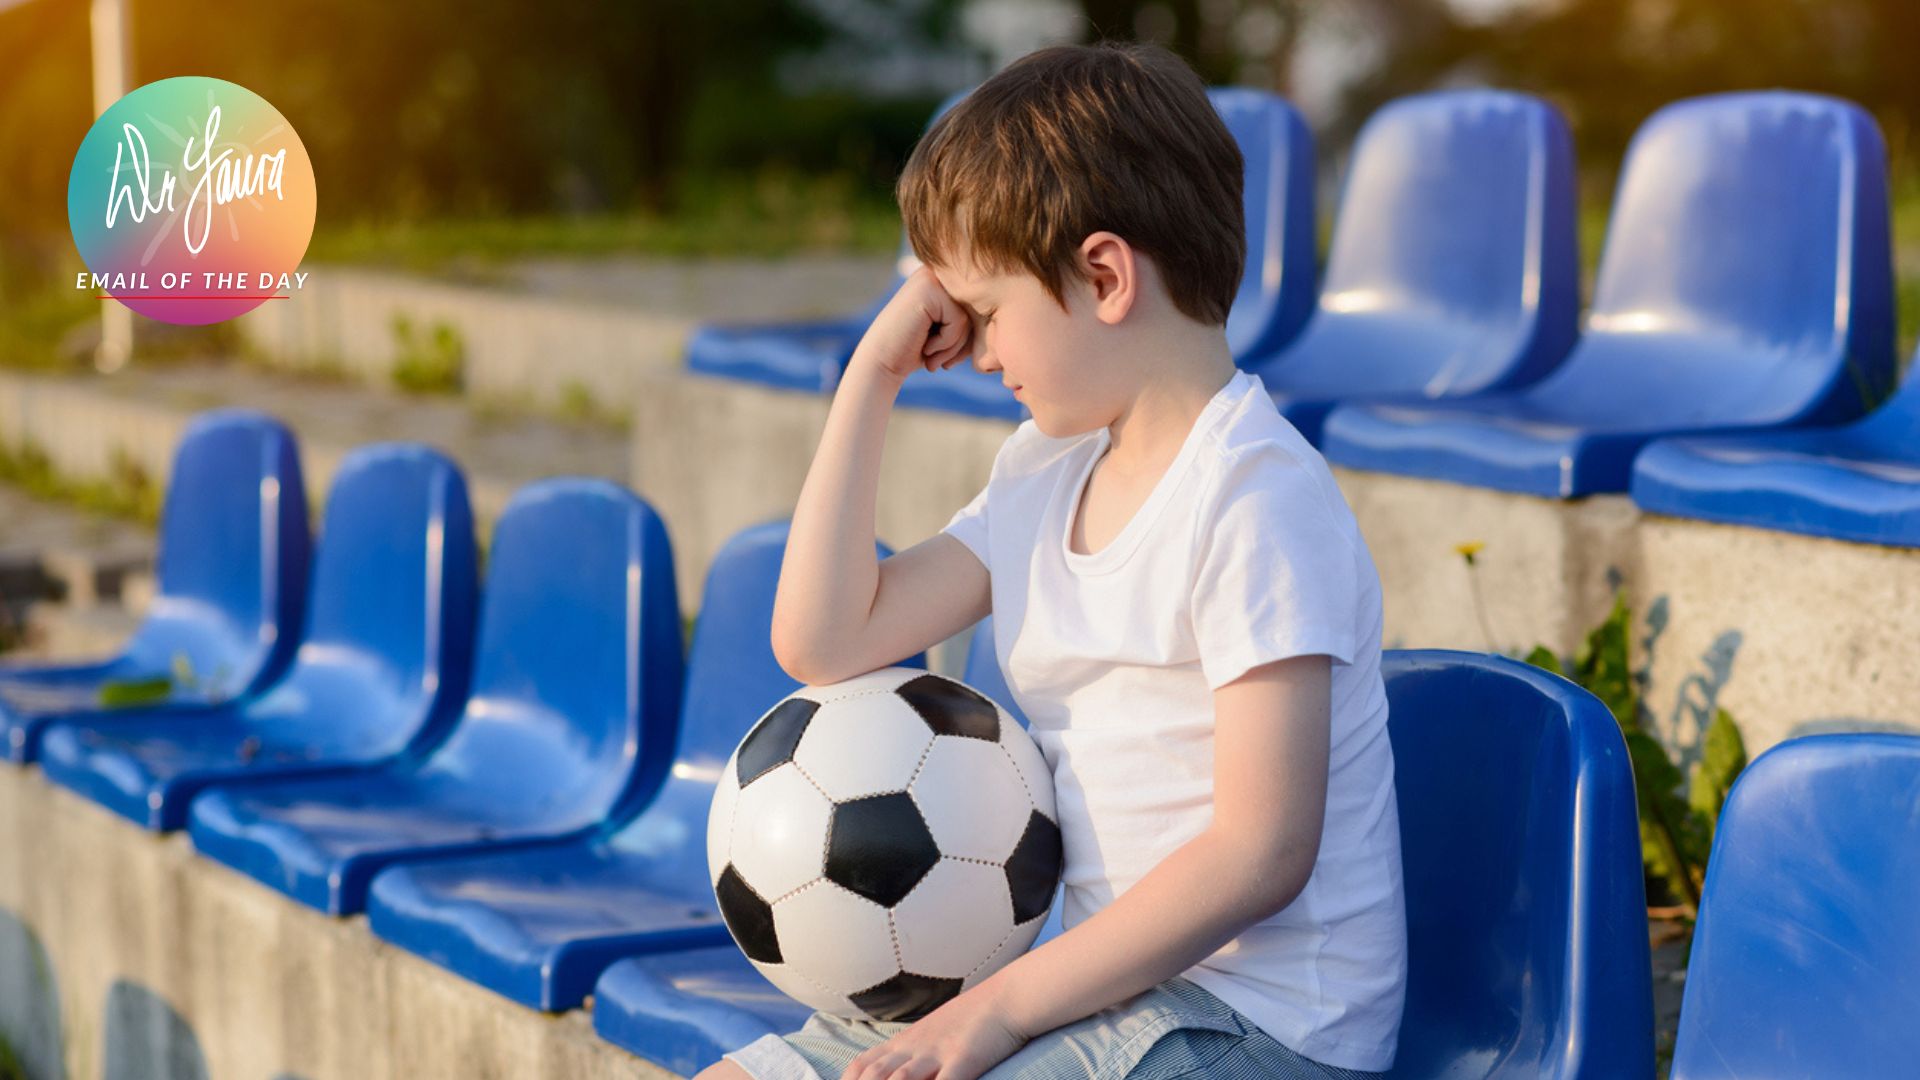 Little boy sits in stadium stands with a soccer ball on his lap and his fist resting on forehead